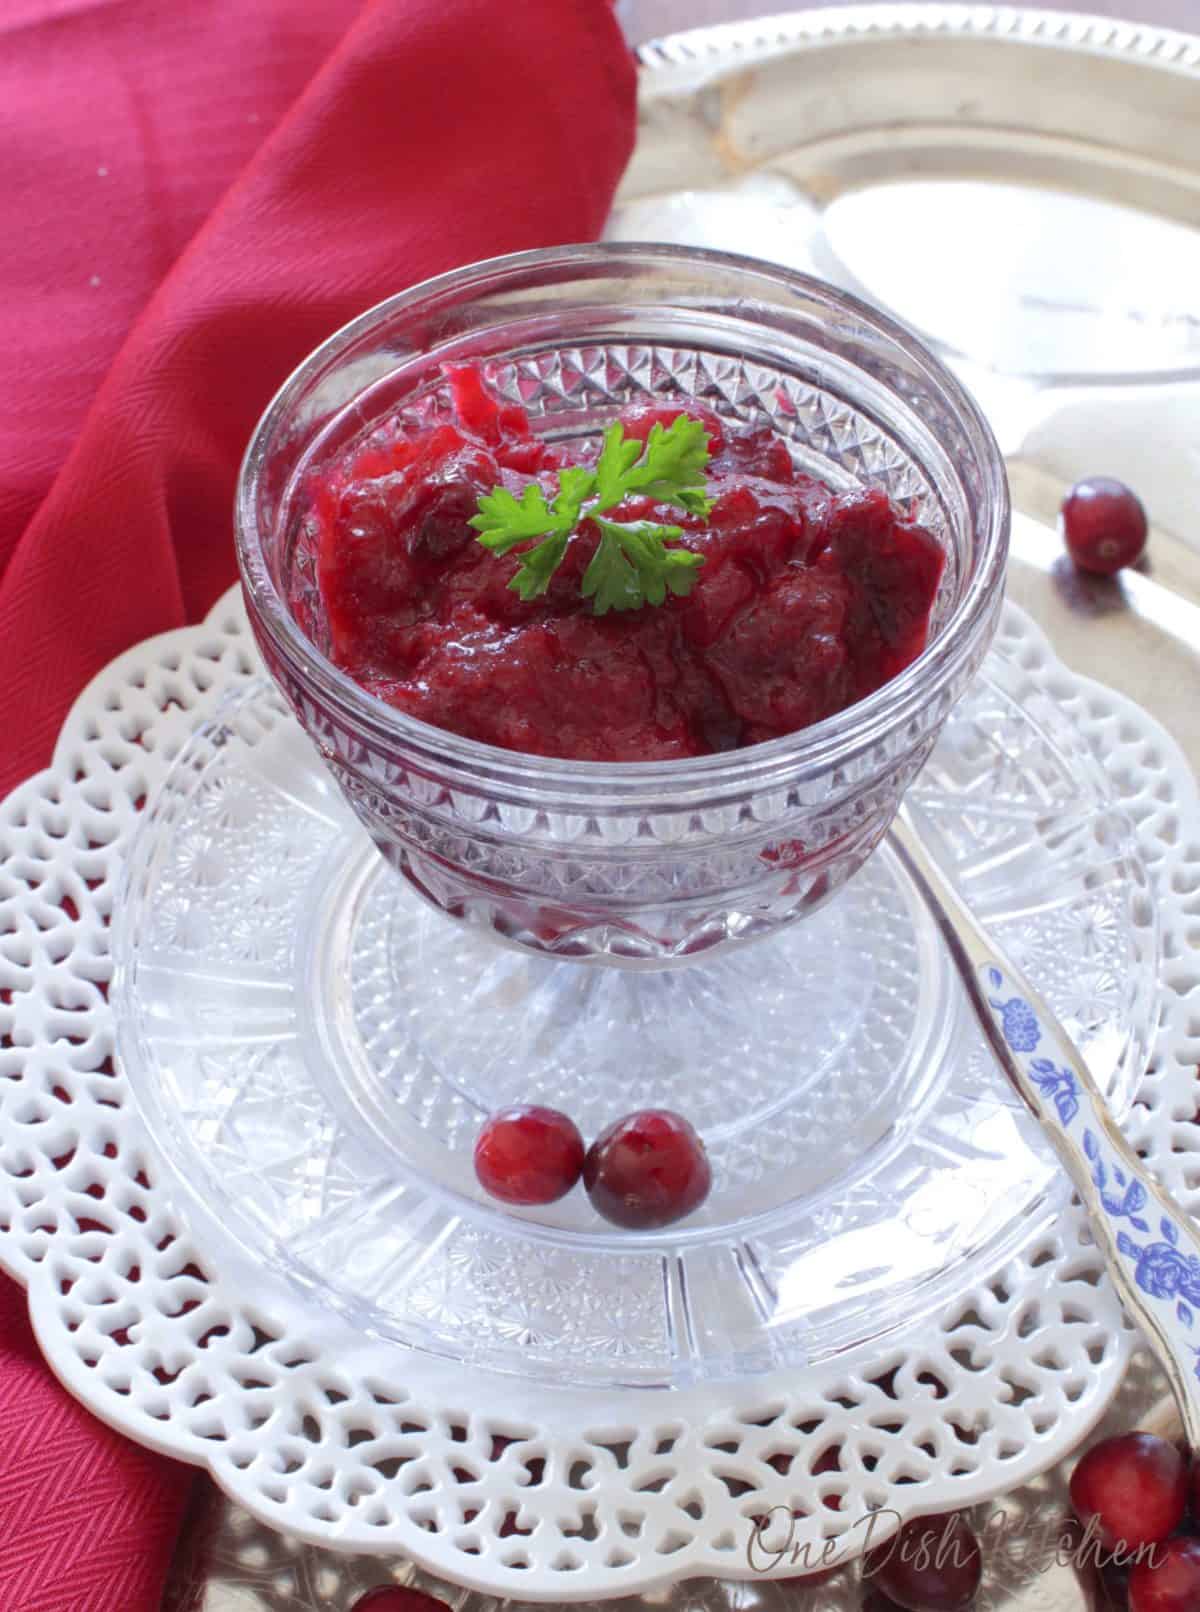 a small bowl of cranberry sauce next to a red napkin.